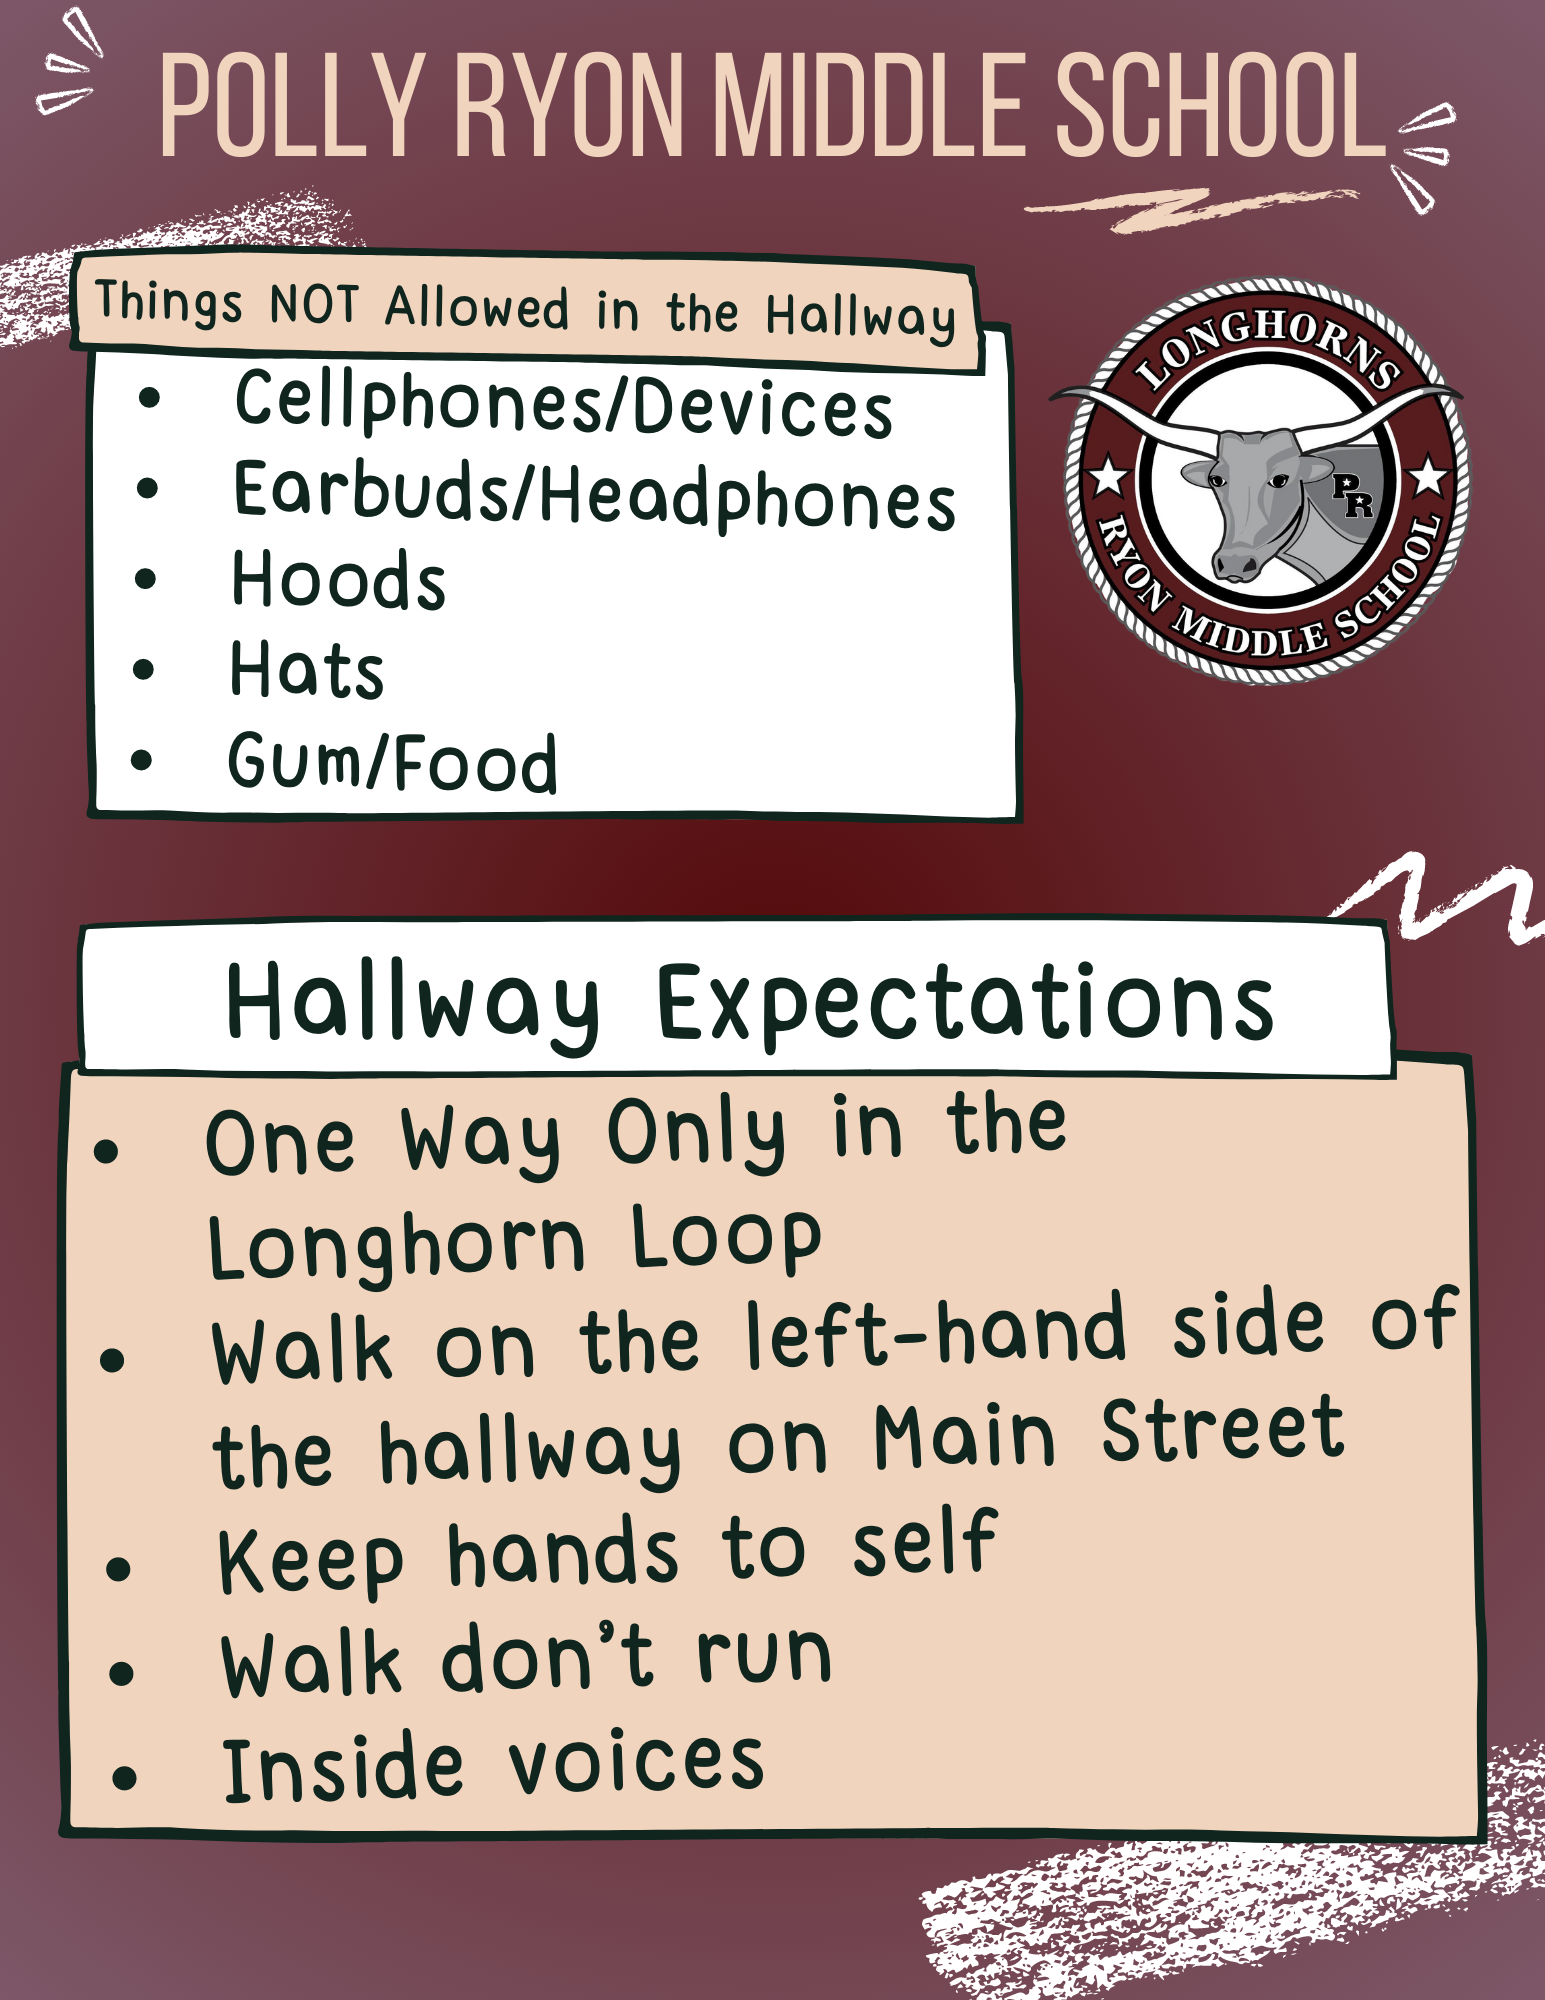 PRMS Hallway Rules (8.5 × 11 in)